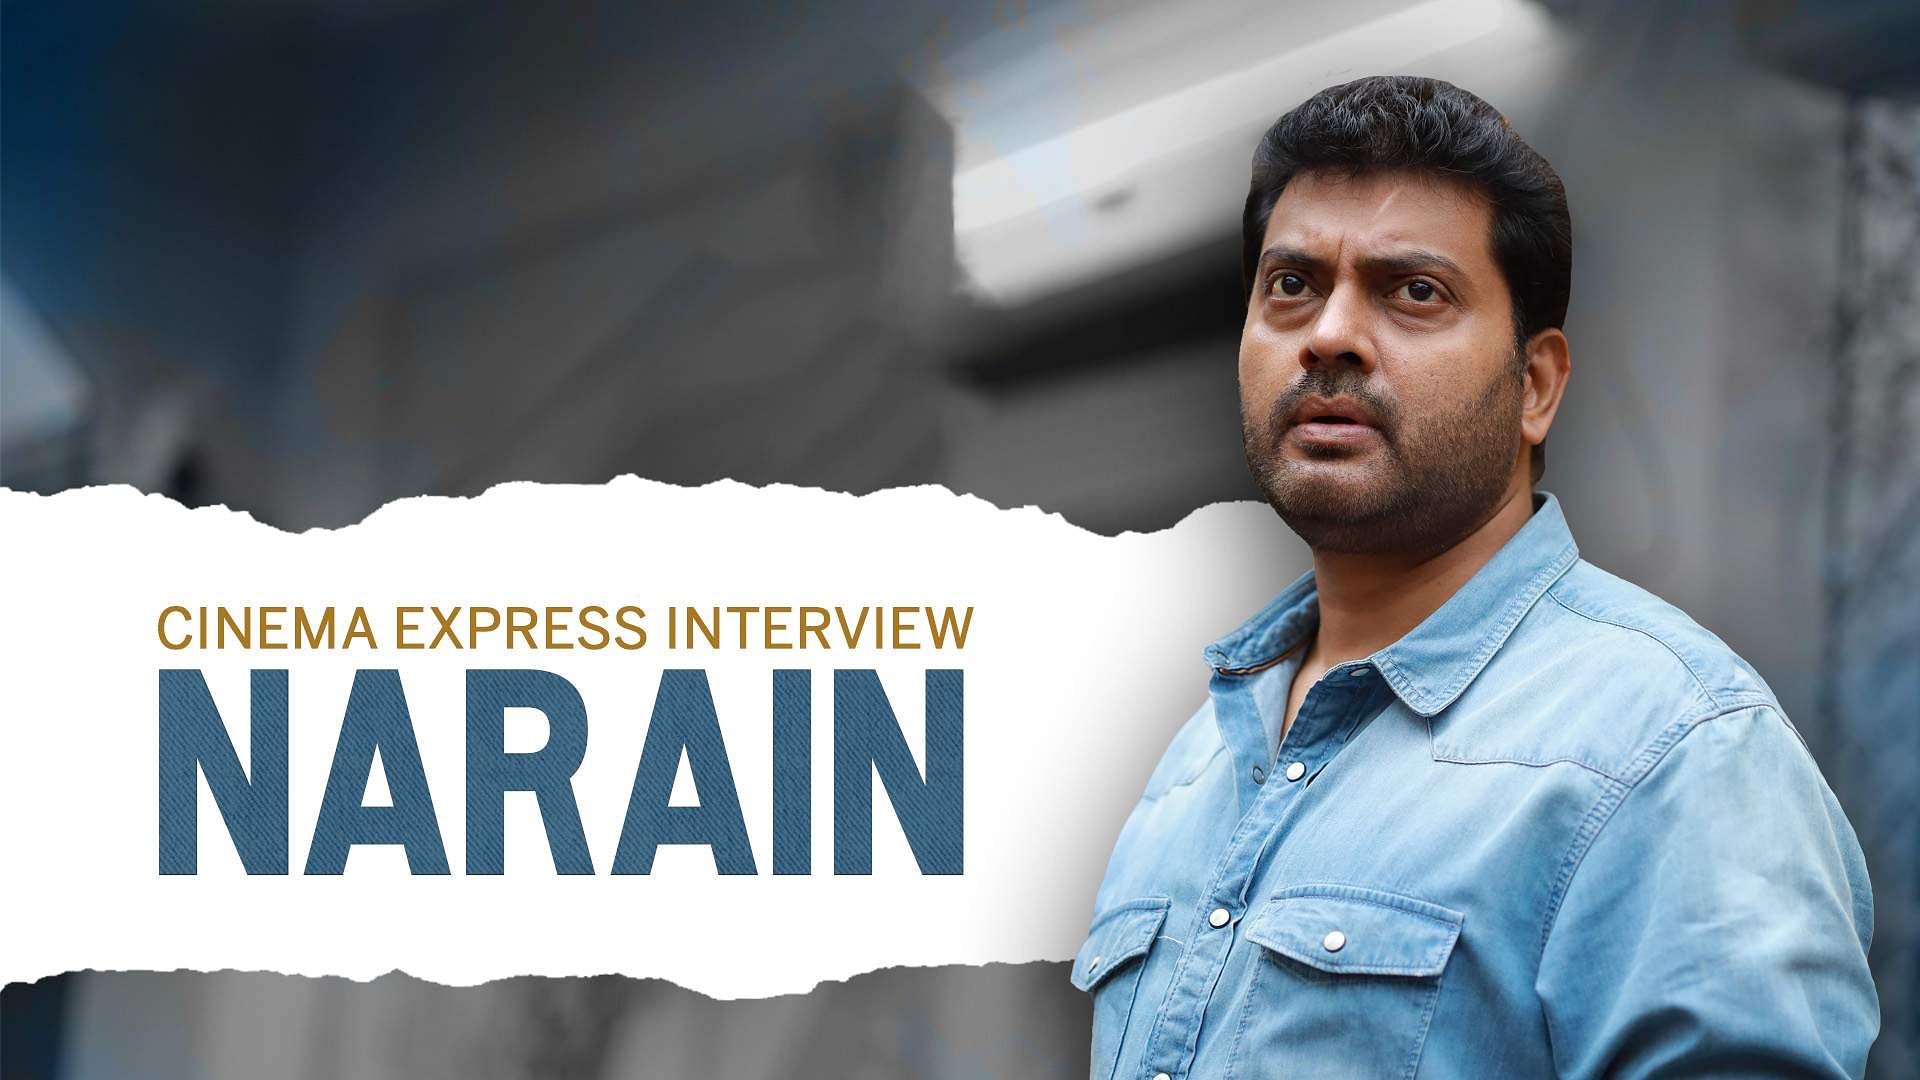 Narain: I want to break out of cop roles